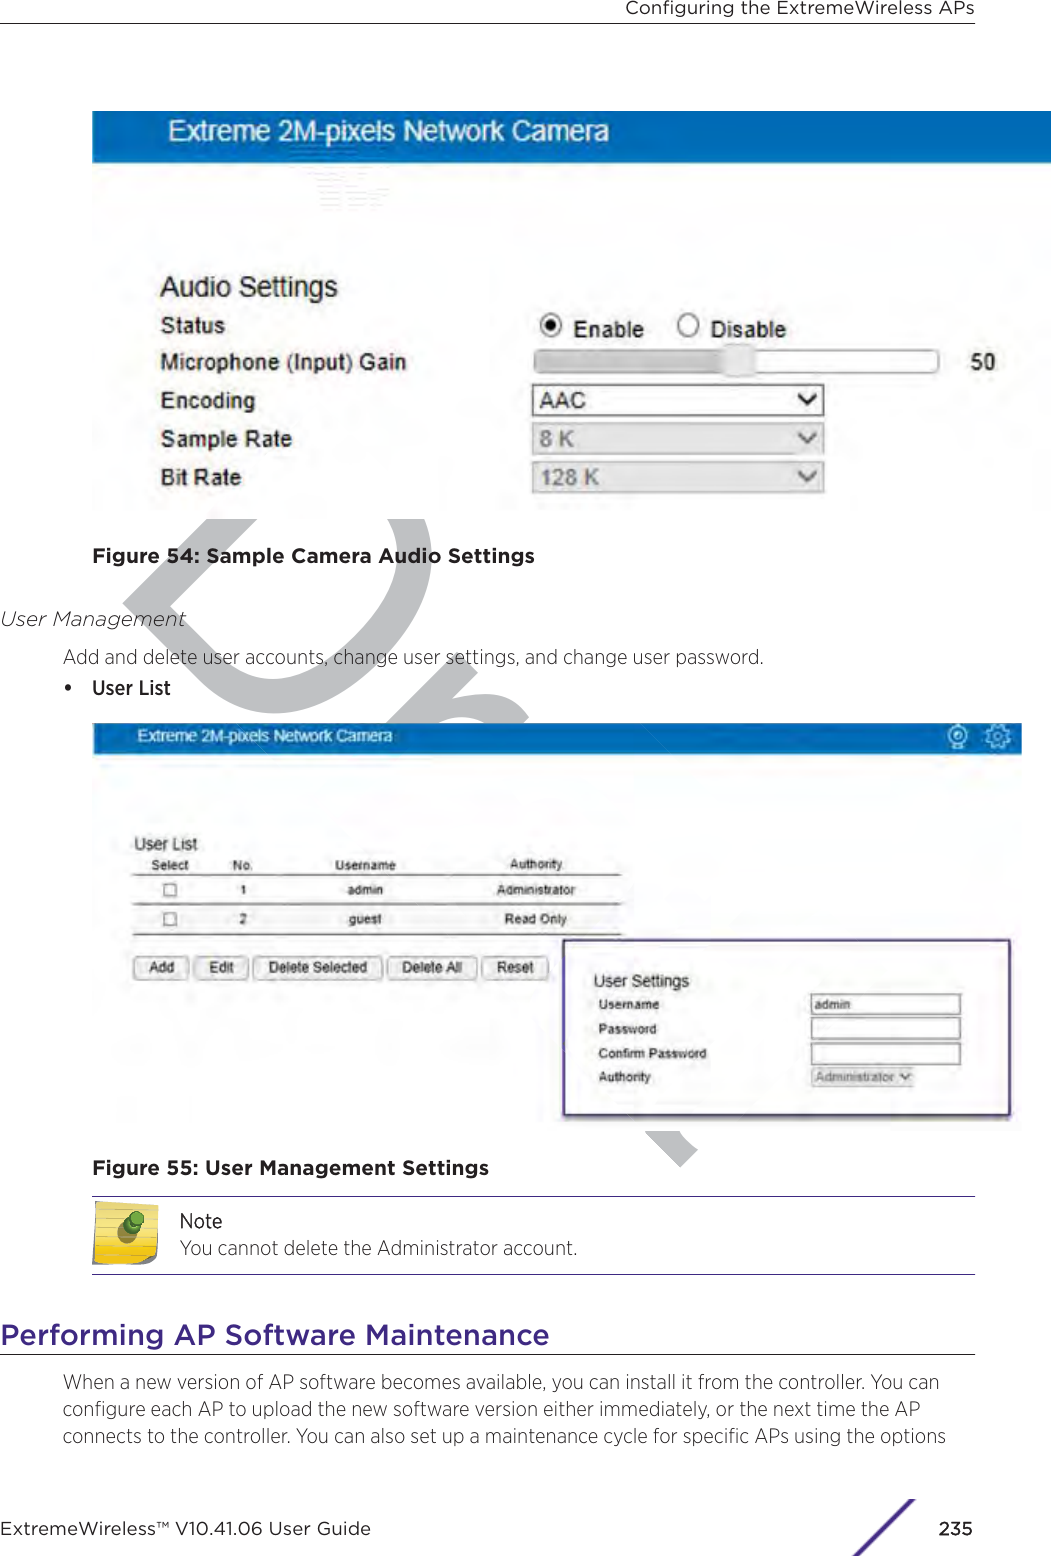 DraftFigure 54: Sample Camera Audio SettingsUser ManagementAdd and delete user accounts, change user settings, and change user password.•User ListFigure 55: User Management SettingsNNoteYou cannot delete the Administrator account.Performing AP Software MaintenanceWhen a new version of AP software becomes available, you can install it from the controller. You canconﬁgure each AP to upload the new software version either immediately, or the next time the APconnects to the controller. You can also set up a maintenance cycle for speciﬁc APs using the optionsConﬁguring the ExtremeWireless APsExtremeWireless™ V10.41.06 User Guide235